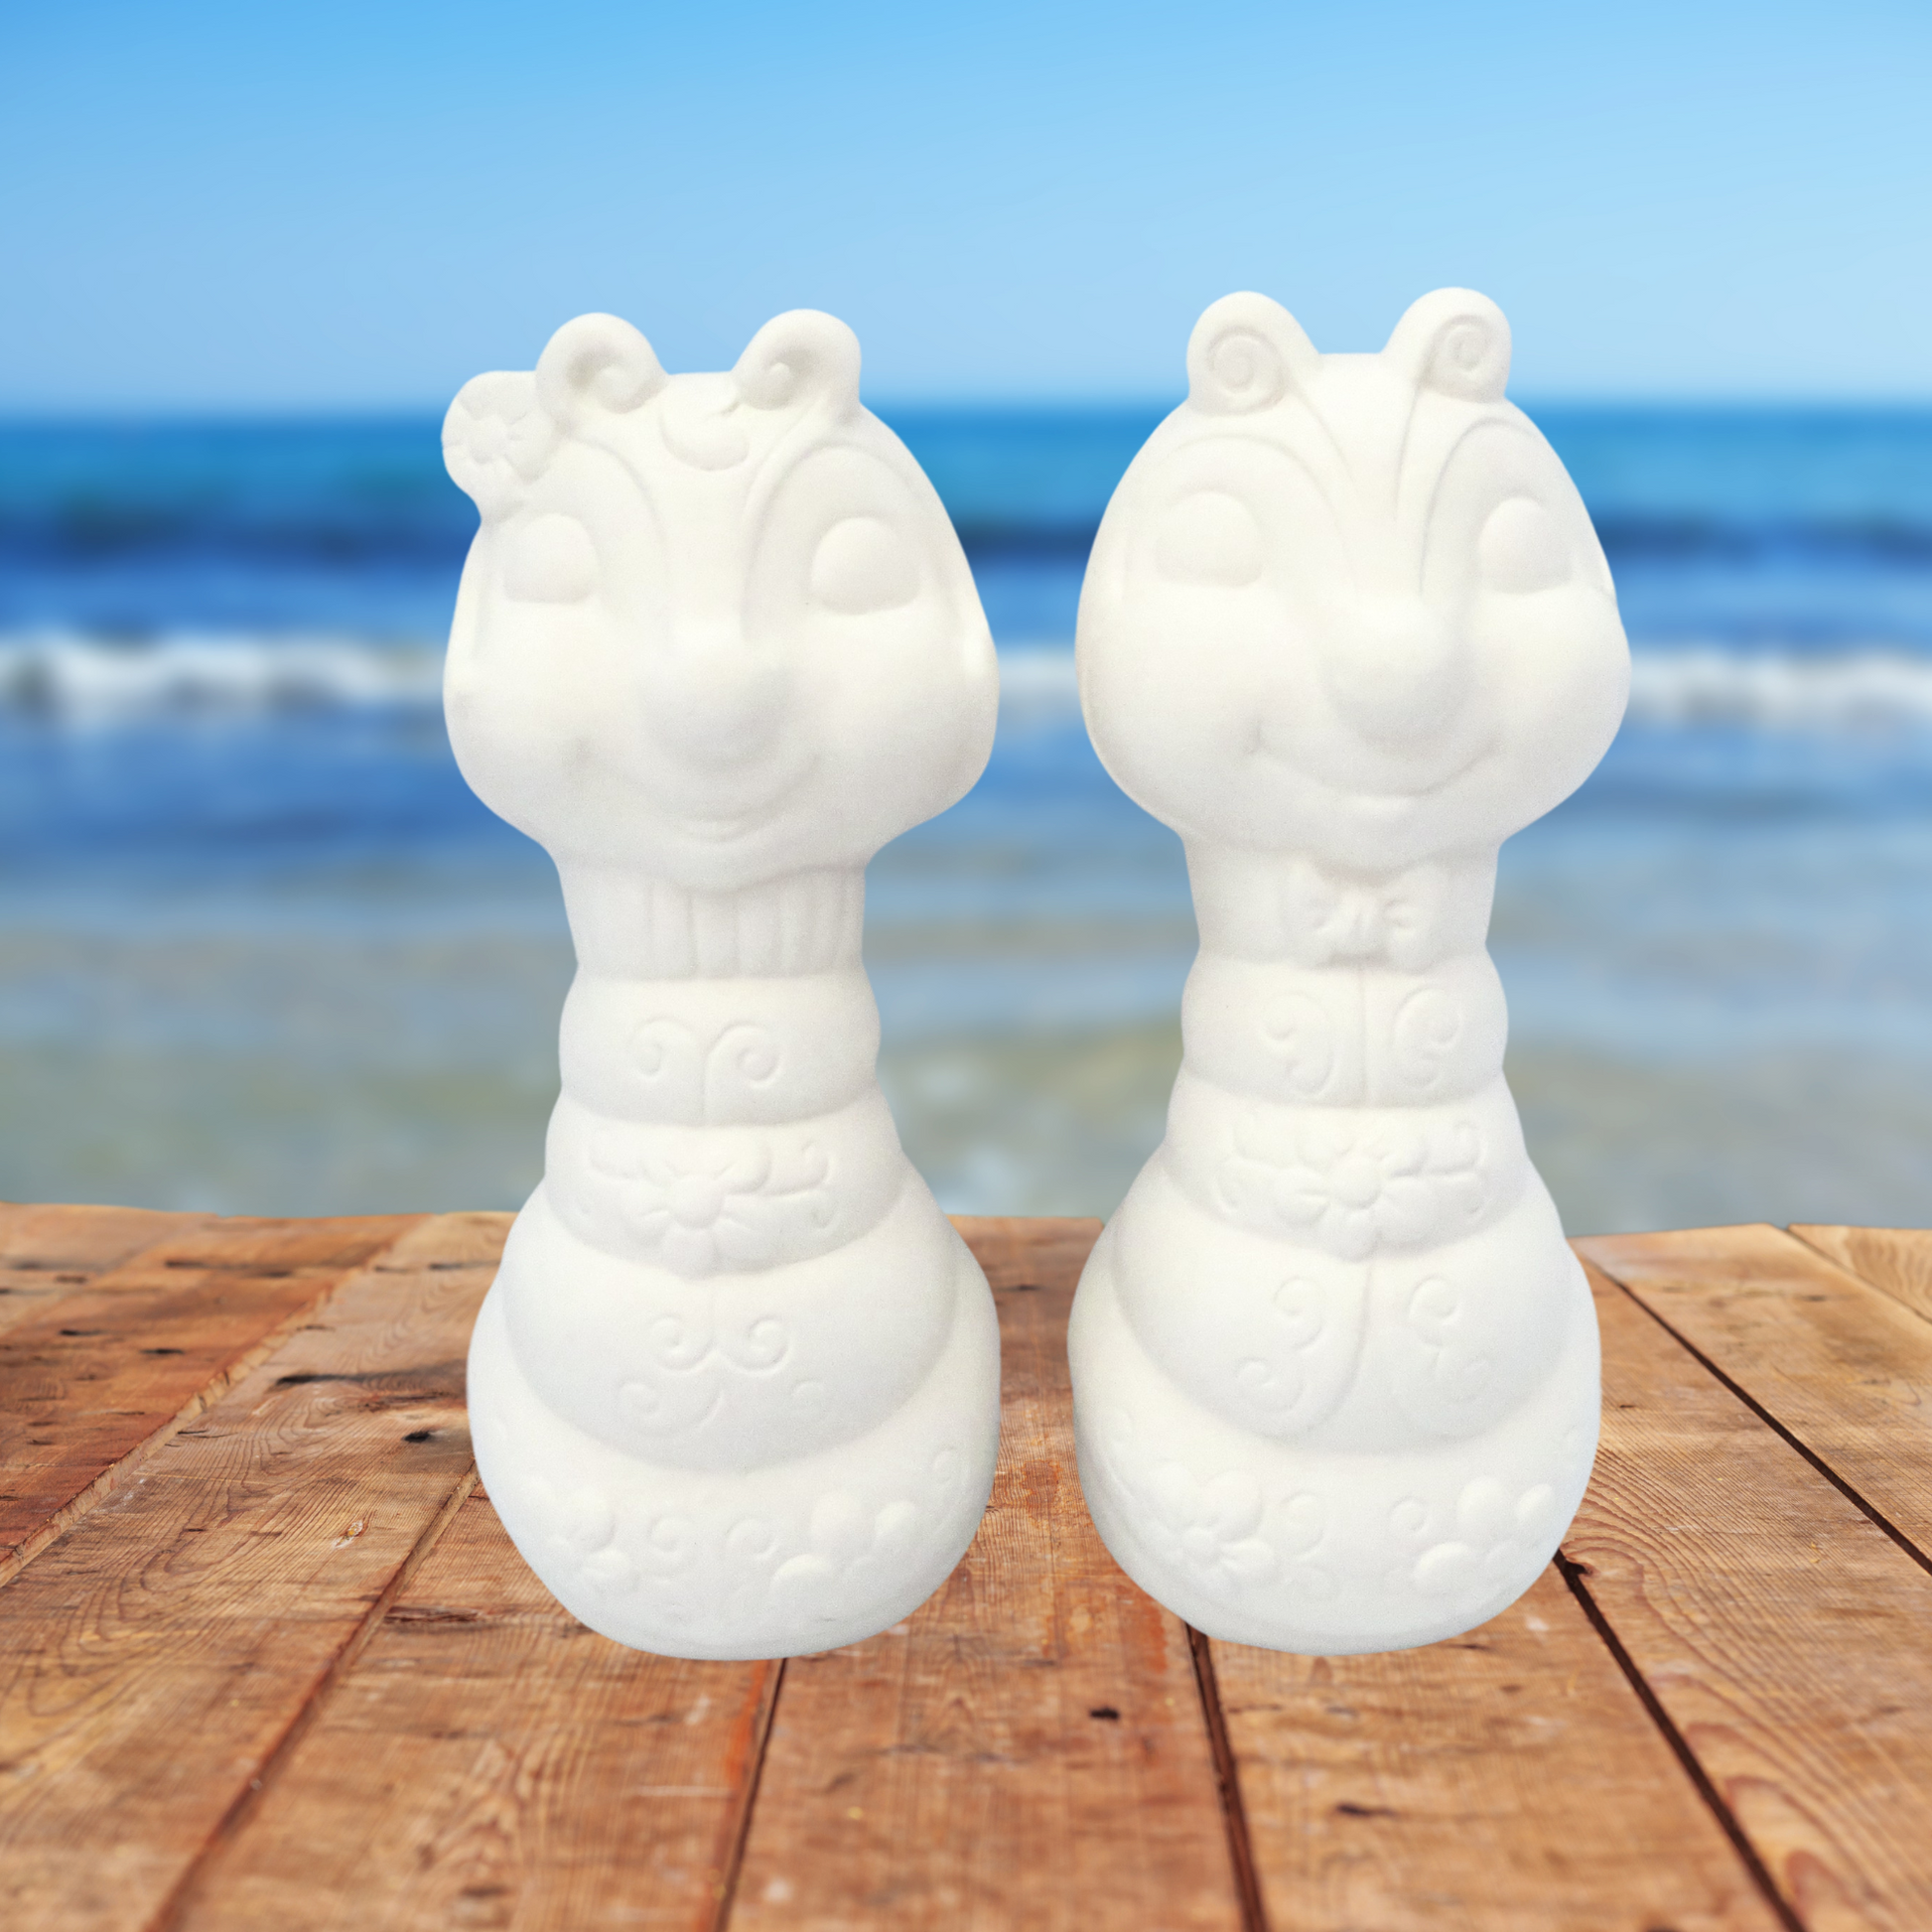 2 Ready to Paint Ceramic Bug figurines facing forward on a table by the ocean